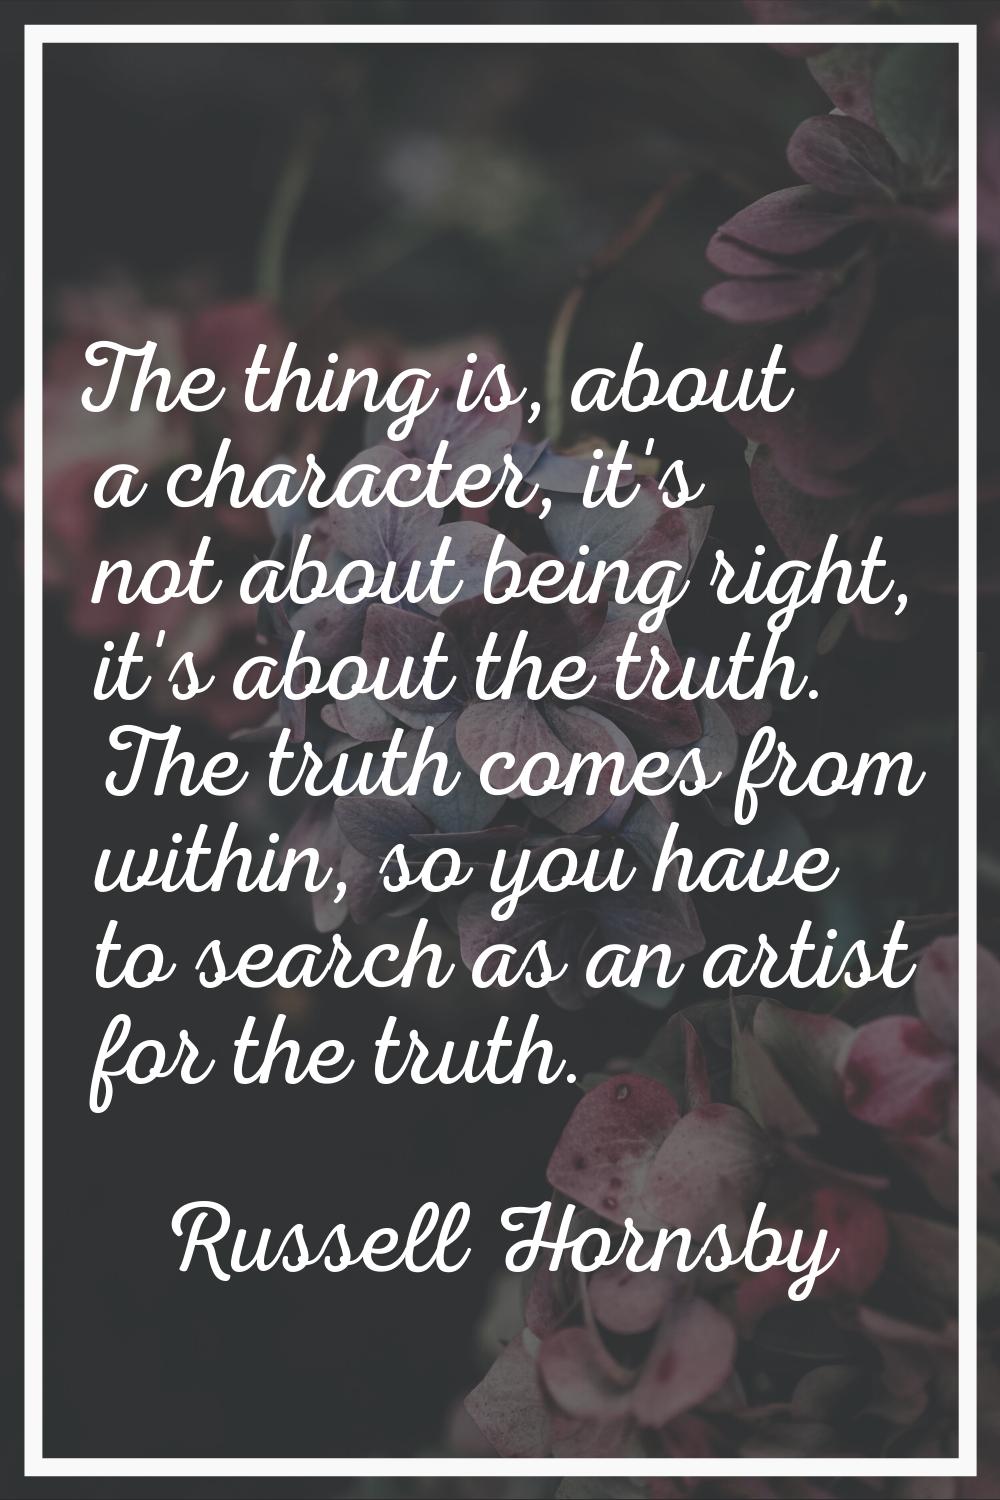 The thing is, about a character, it's not about being right, it's about the truth. The truth comes 